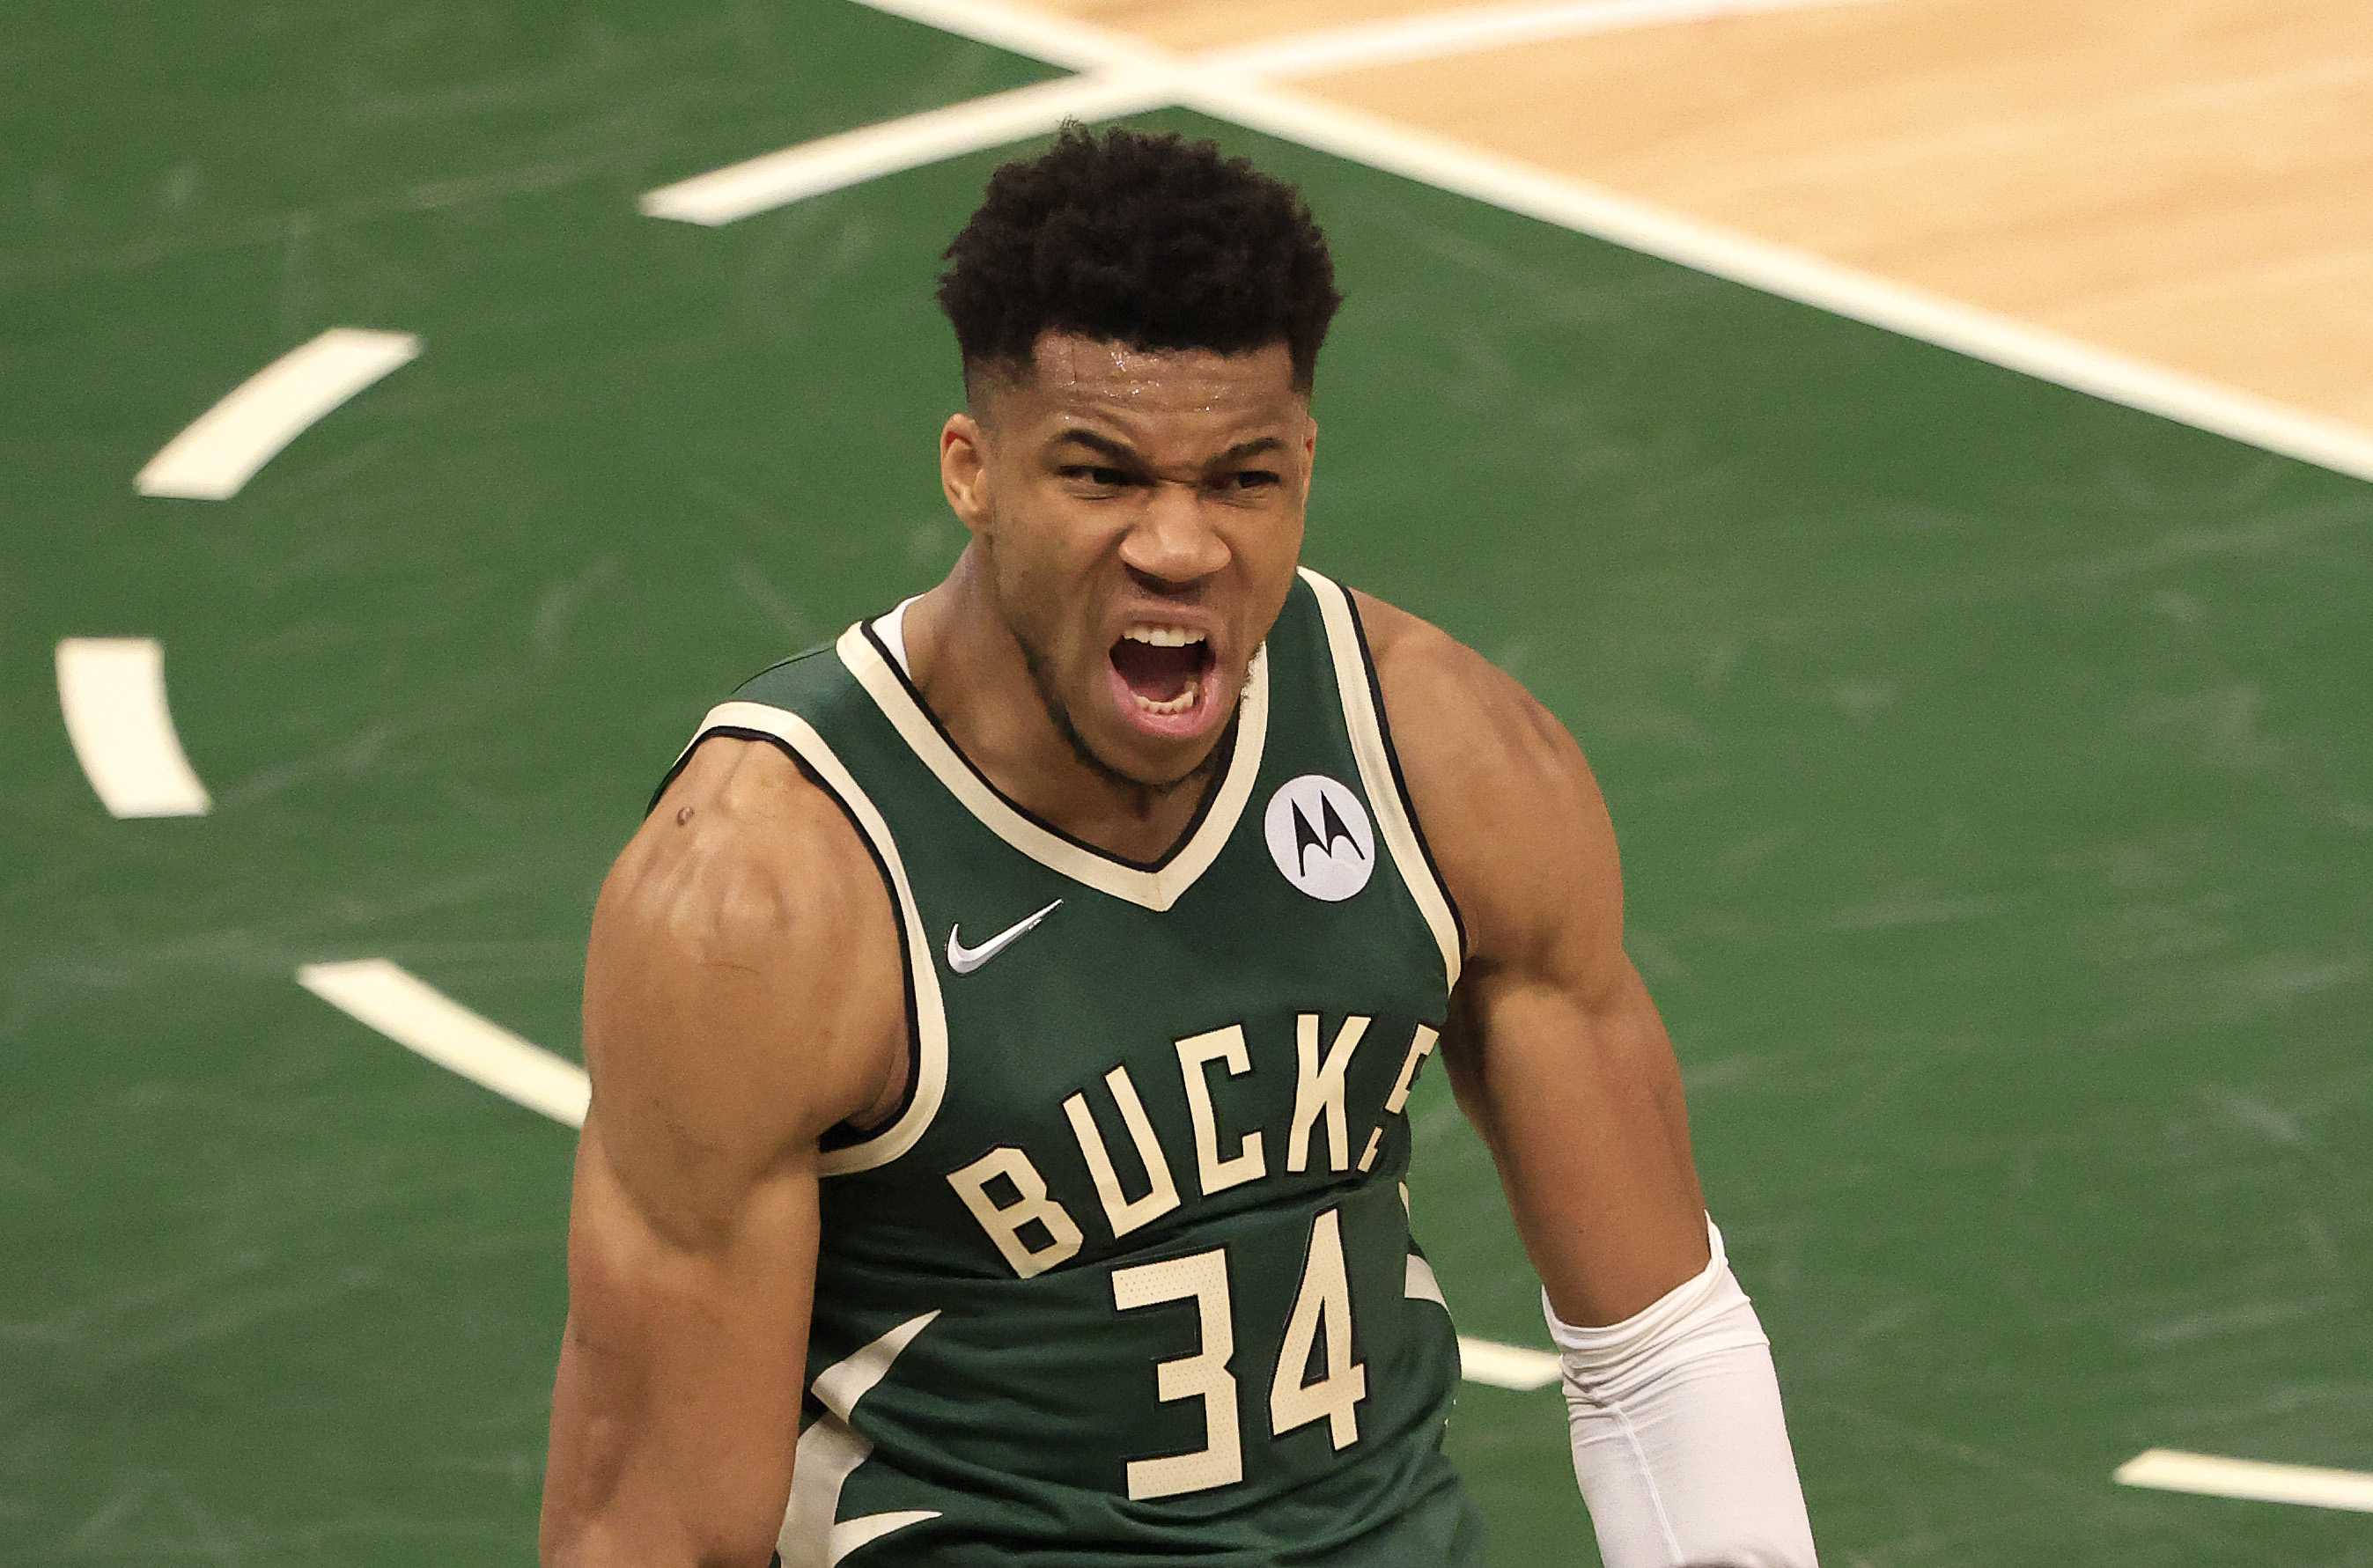 Giannis was pretty pumped!